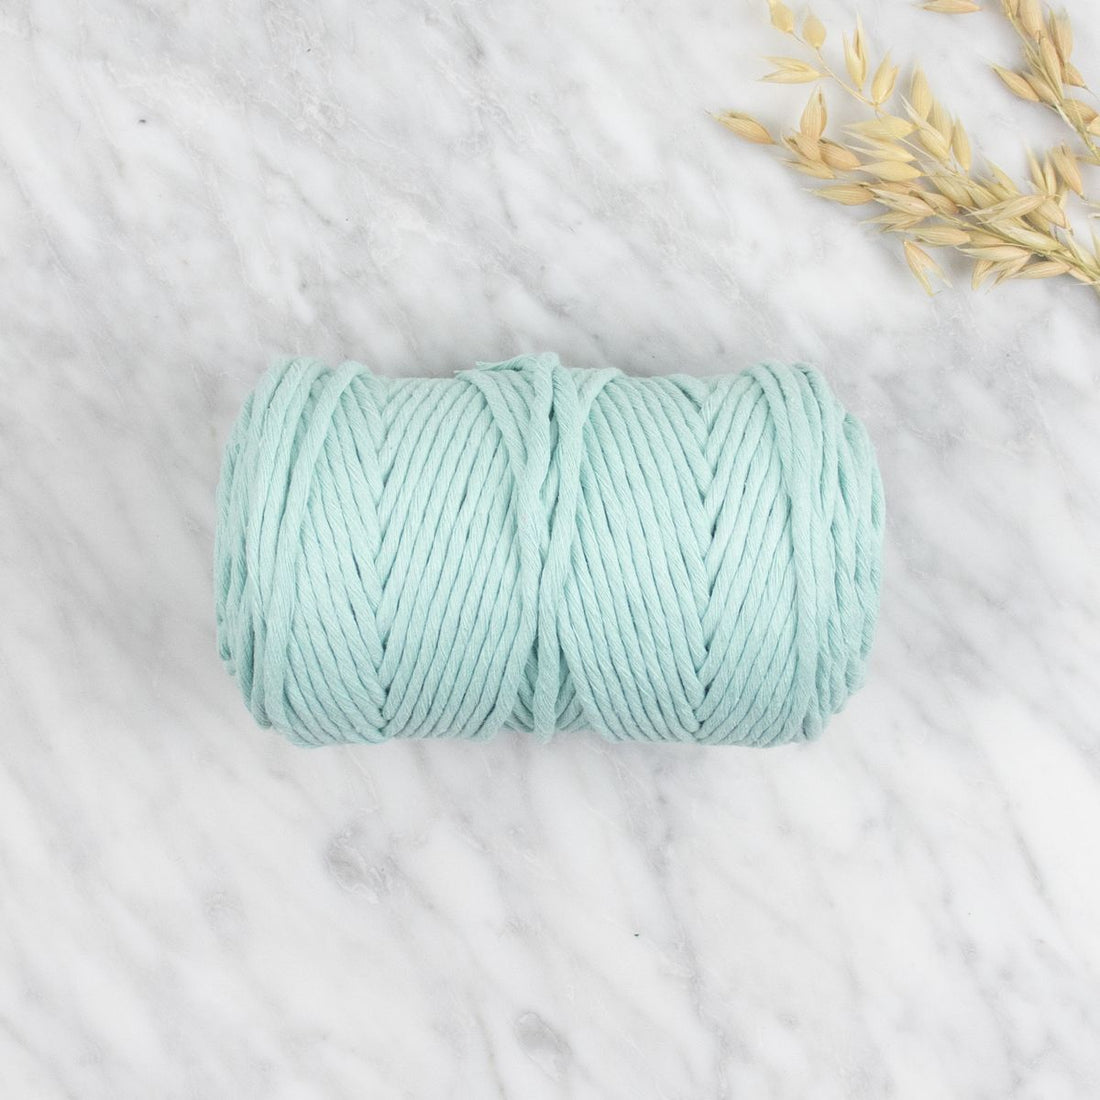 5mm Recycled Cotton String 0.5 kg - Mint